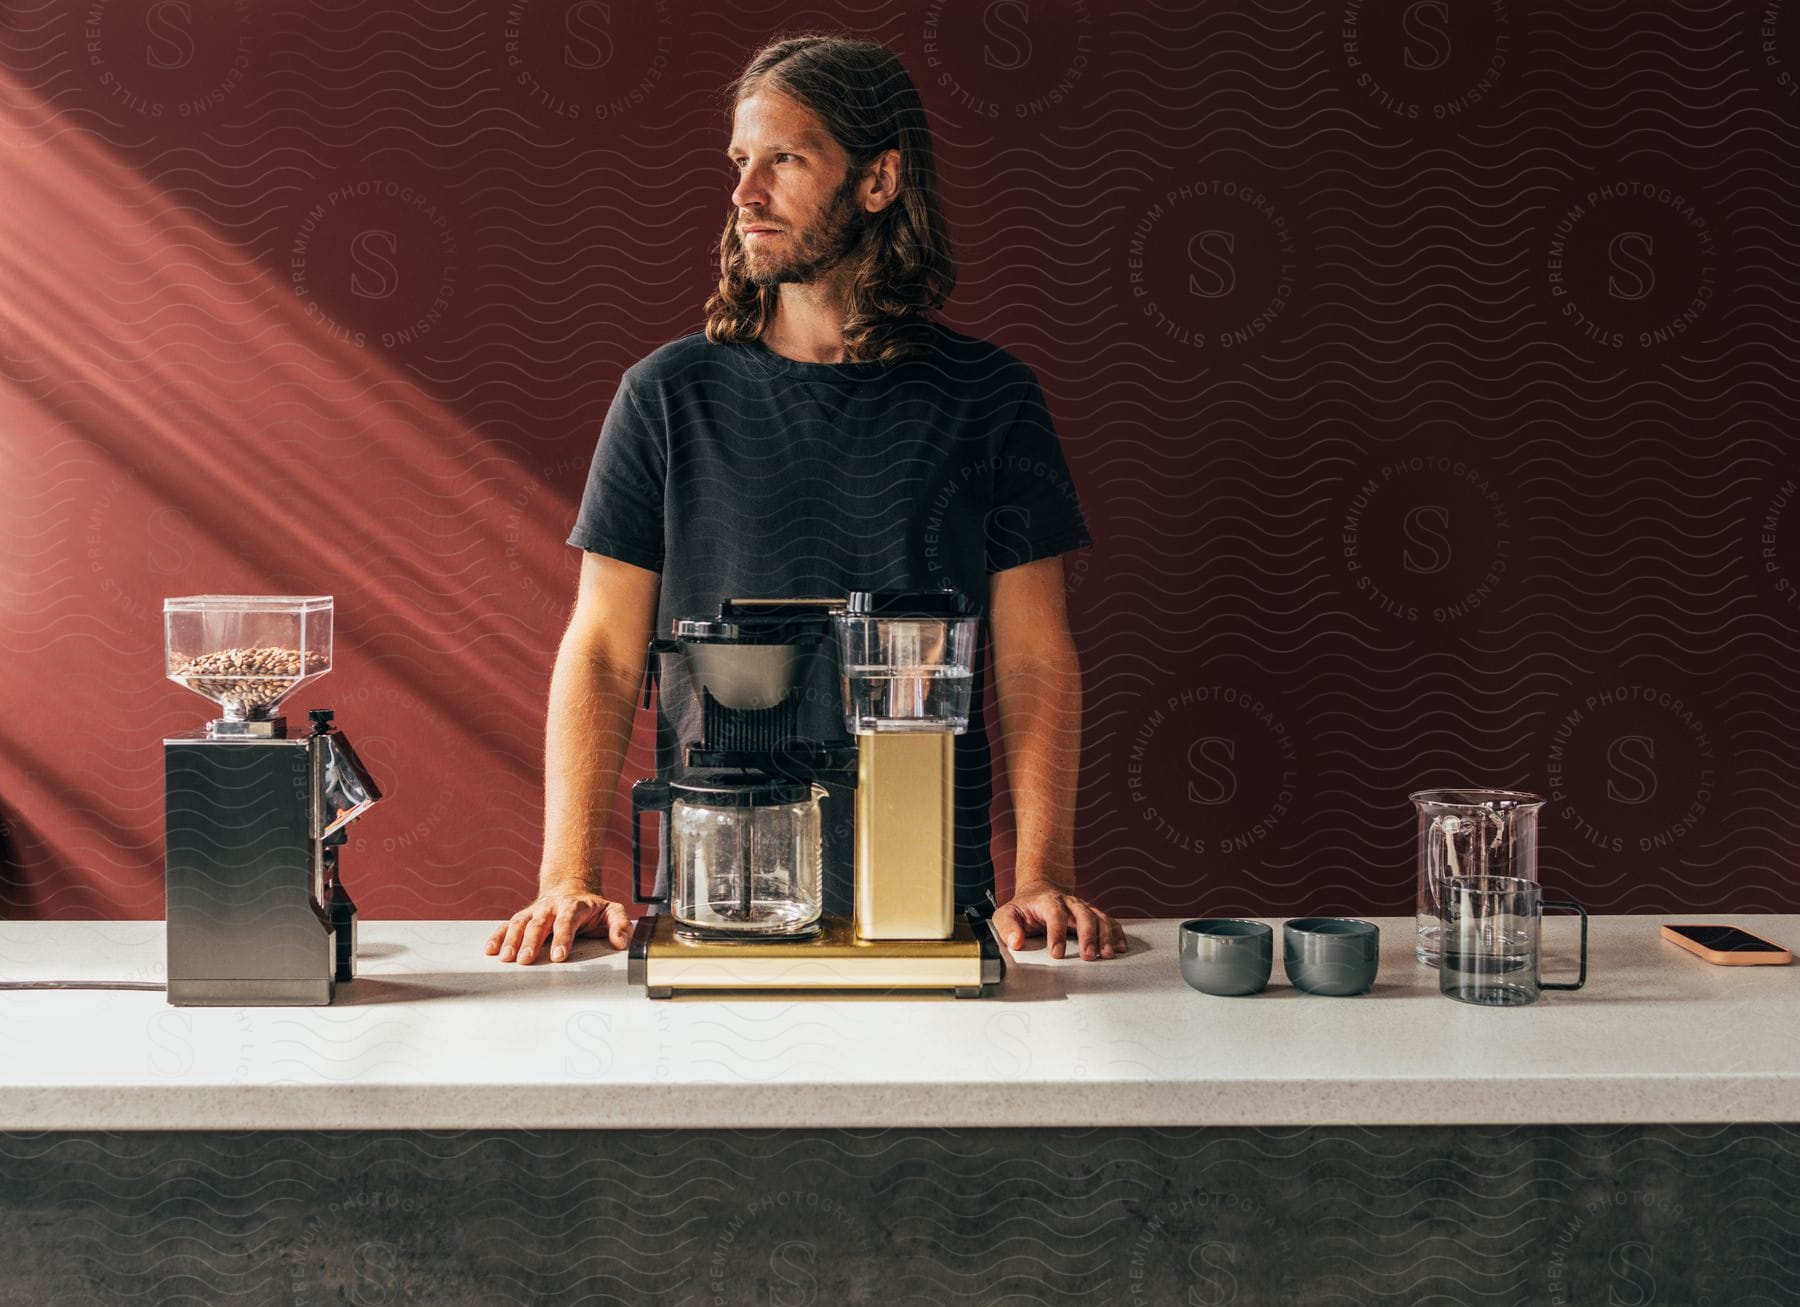 A Bearded Man With Long Hair, Dressed In A Black T-shirt, Stands Behind A Counter With A Coffee Machine